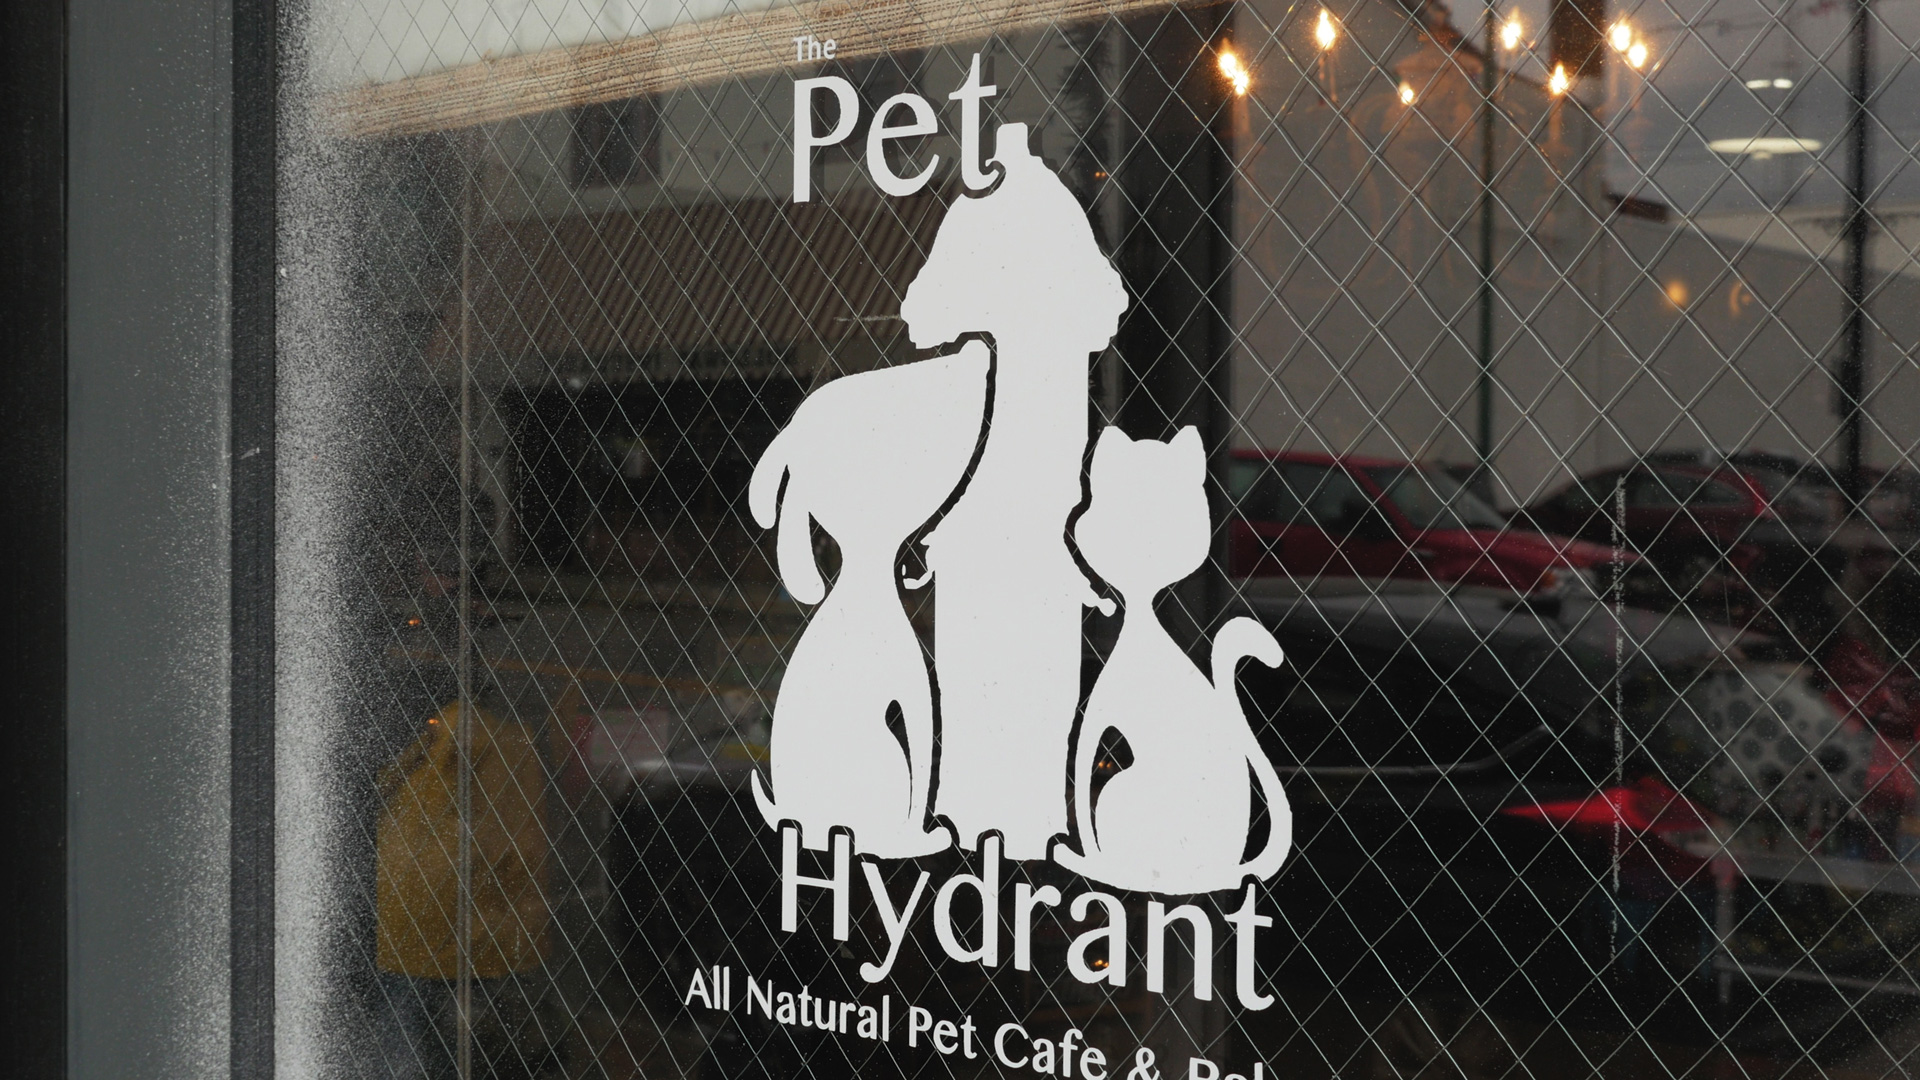 The Pet-Hydrant